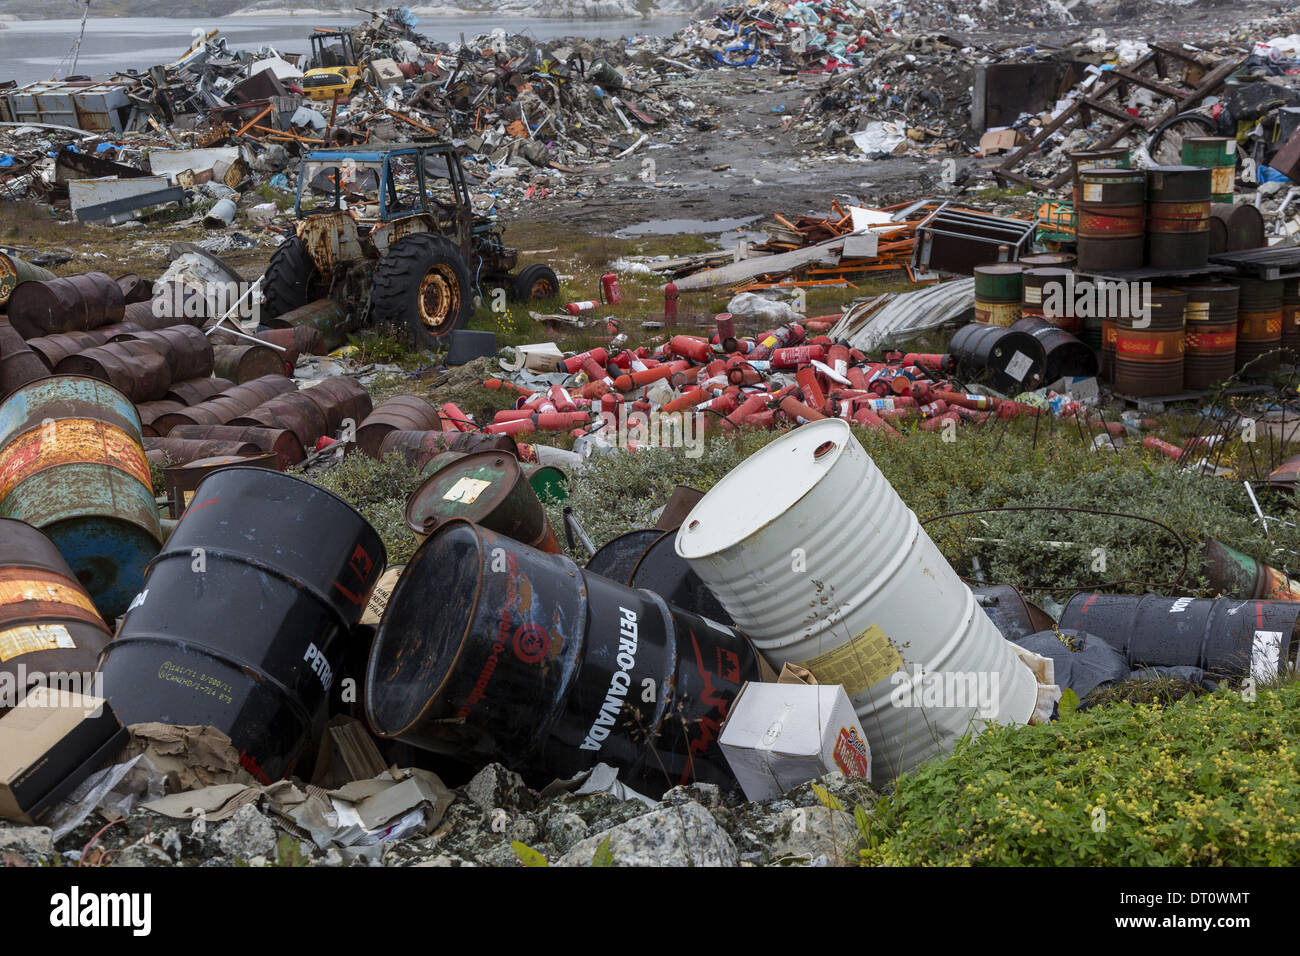 Discarded petro chemical drums at the recycling centre Nanortalik Greenland with eventual leak risk into ocean causing marine damage Stock Photo